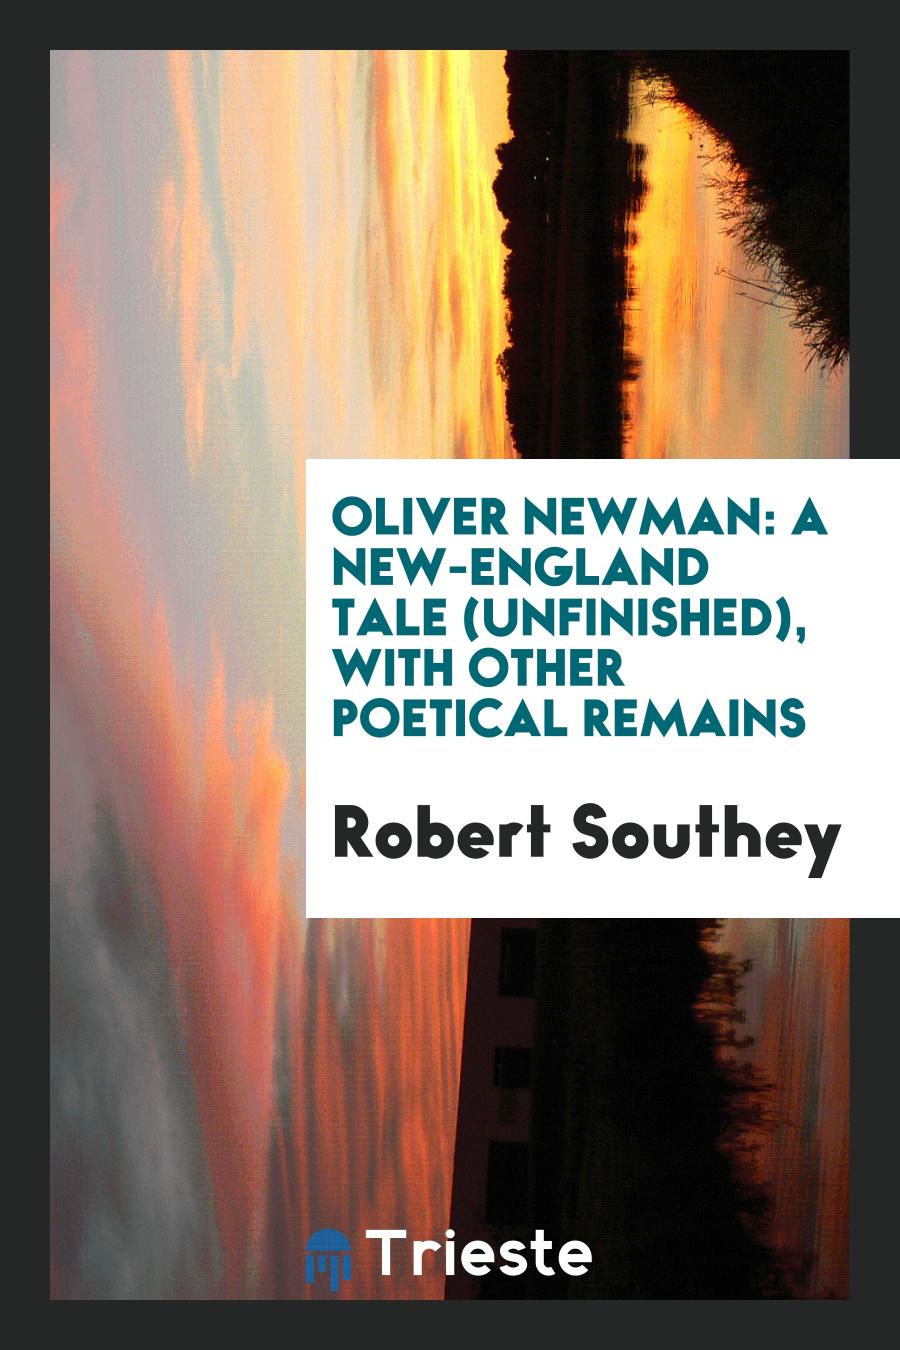 Oliver Newman: A New-England Tale (Unfinished), with Other Poetical Remains